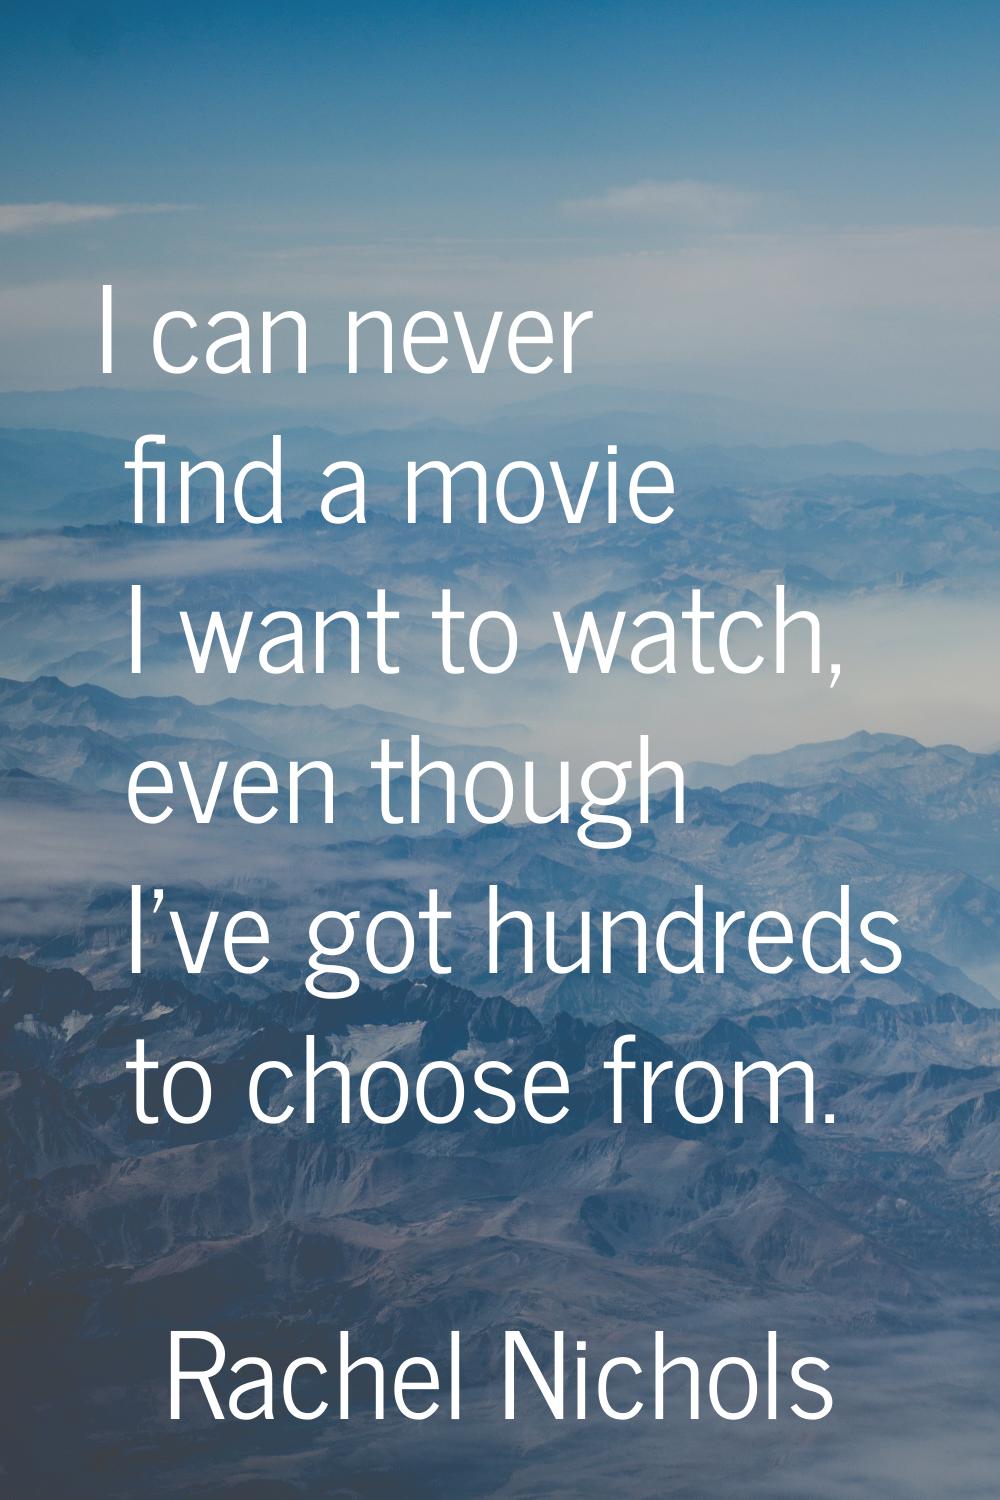 I can never find a movie I want to watch, even though I've got hundreds to choose from.